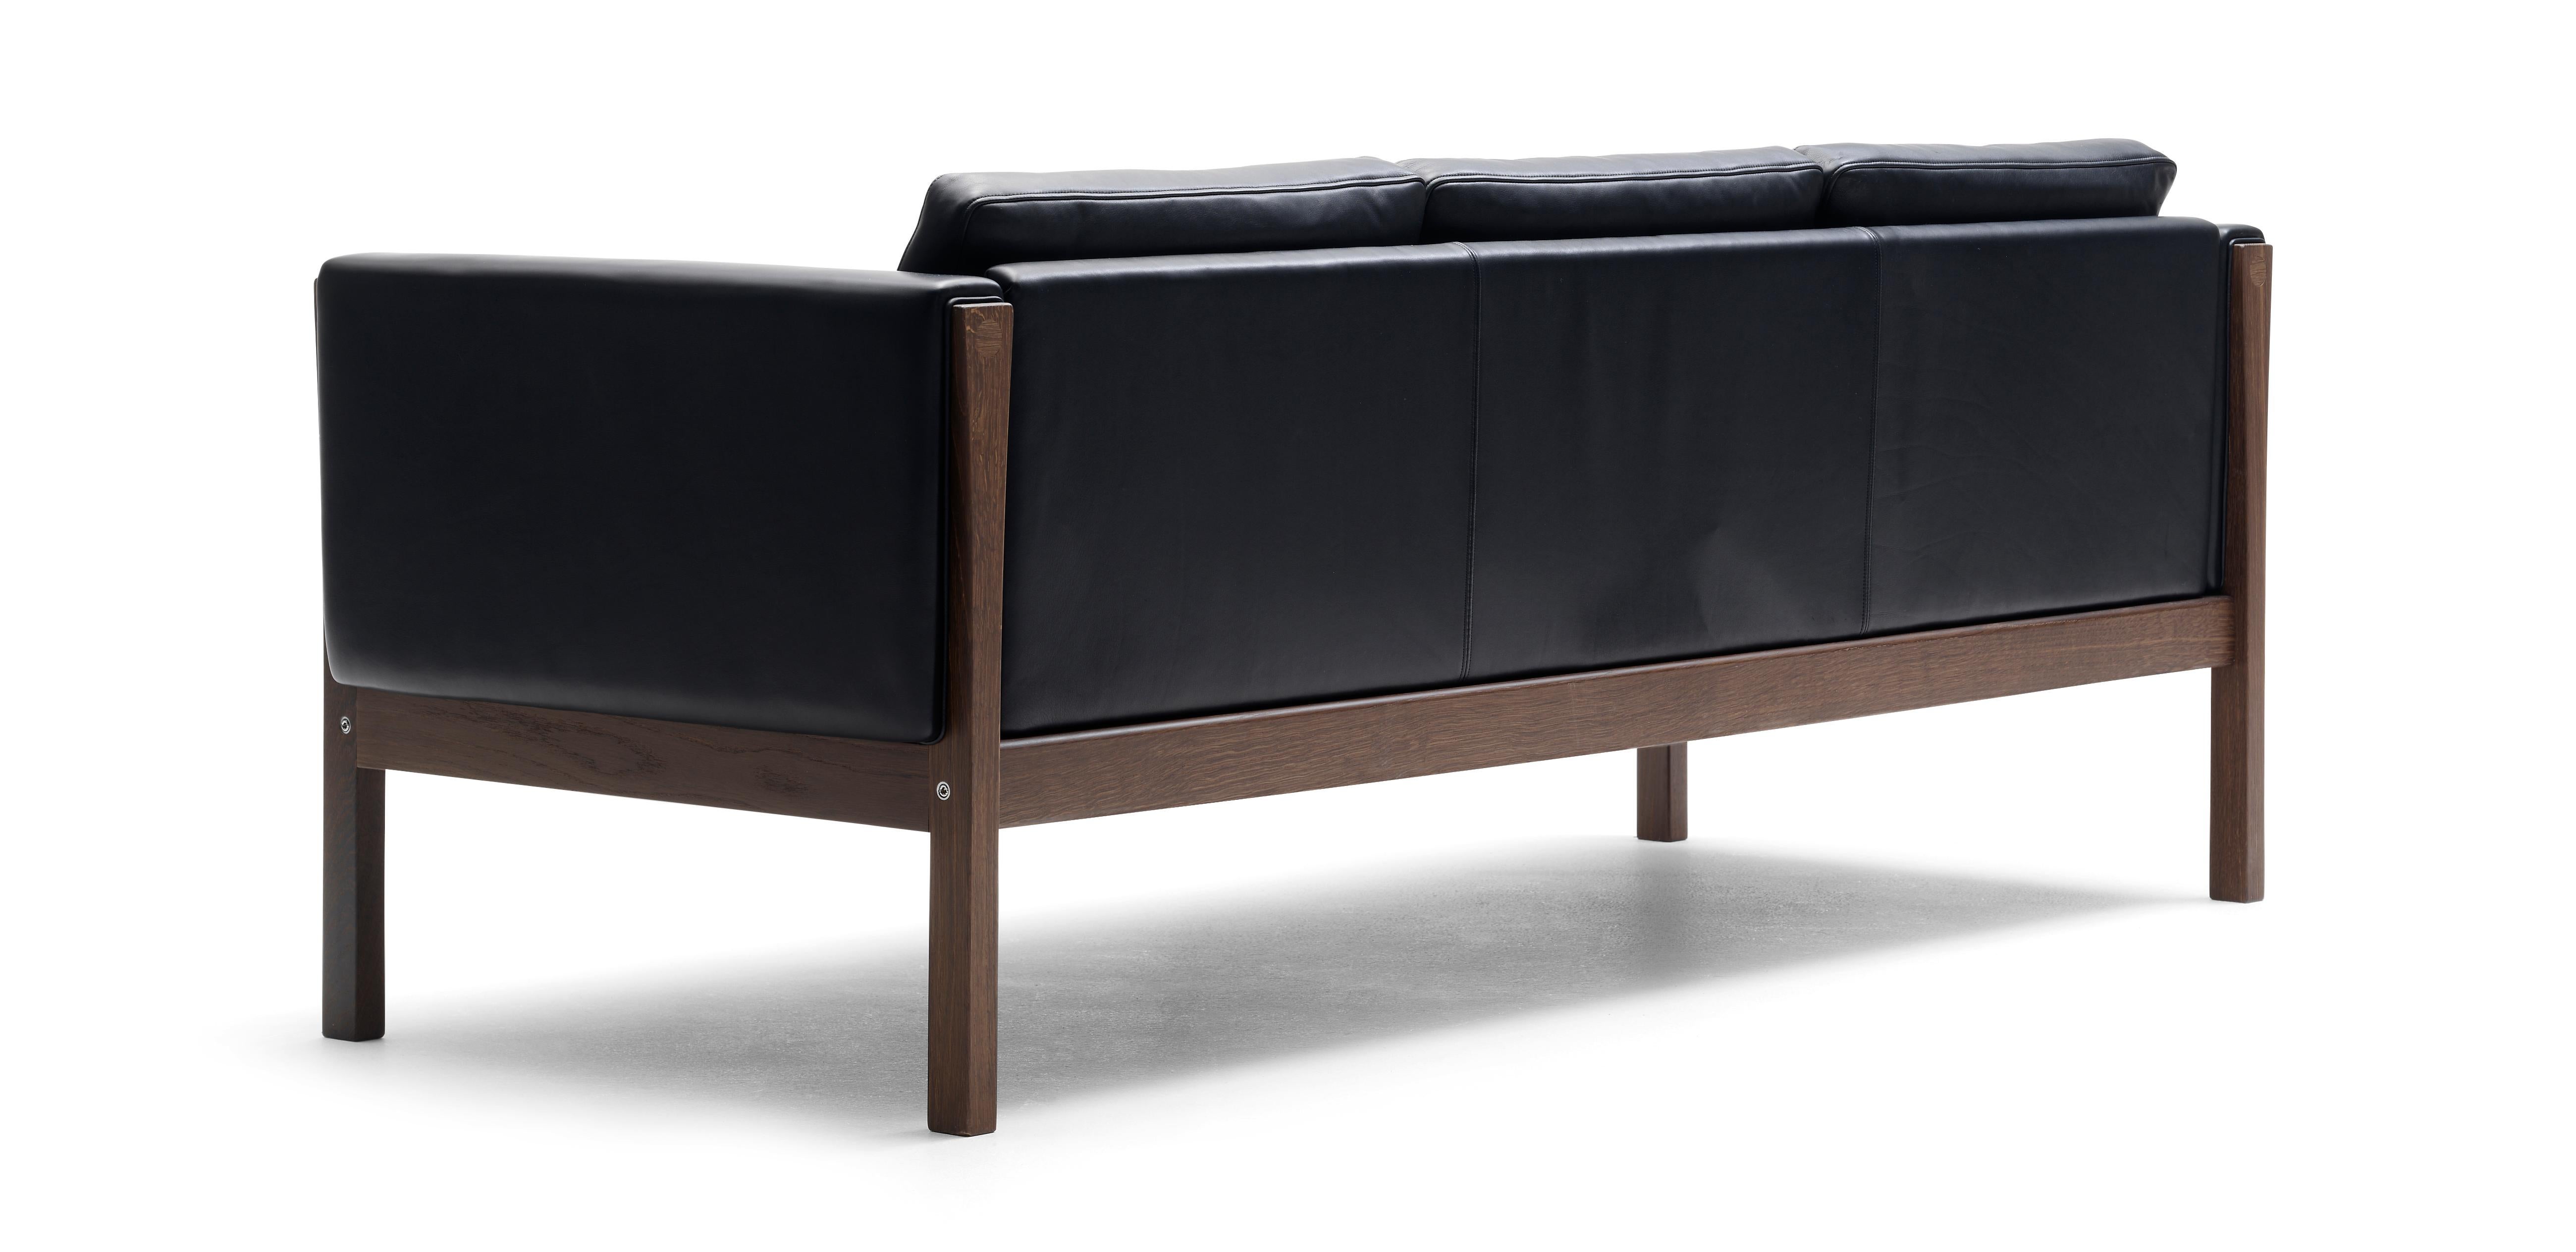 Black (Sif 98) CH163 Sofa in Walnut Oil Frame with Leather Upholstery by Hans J. Wegner 3